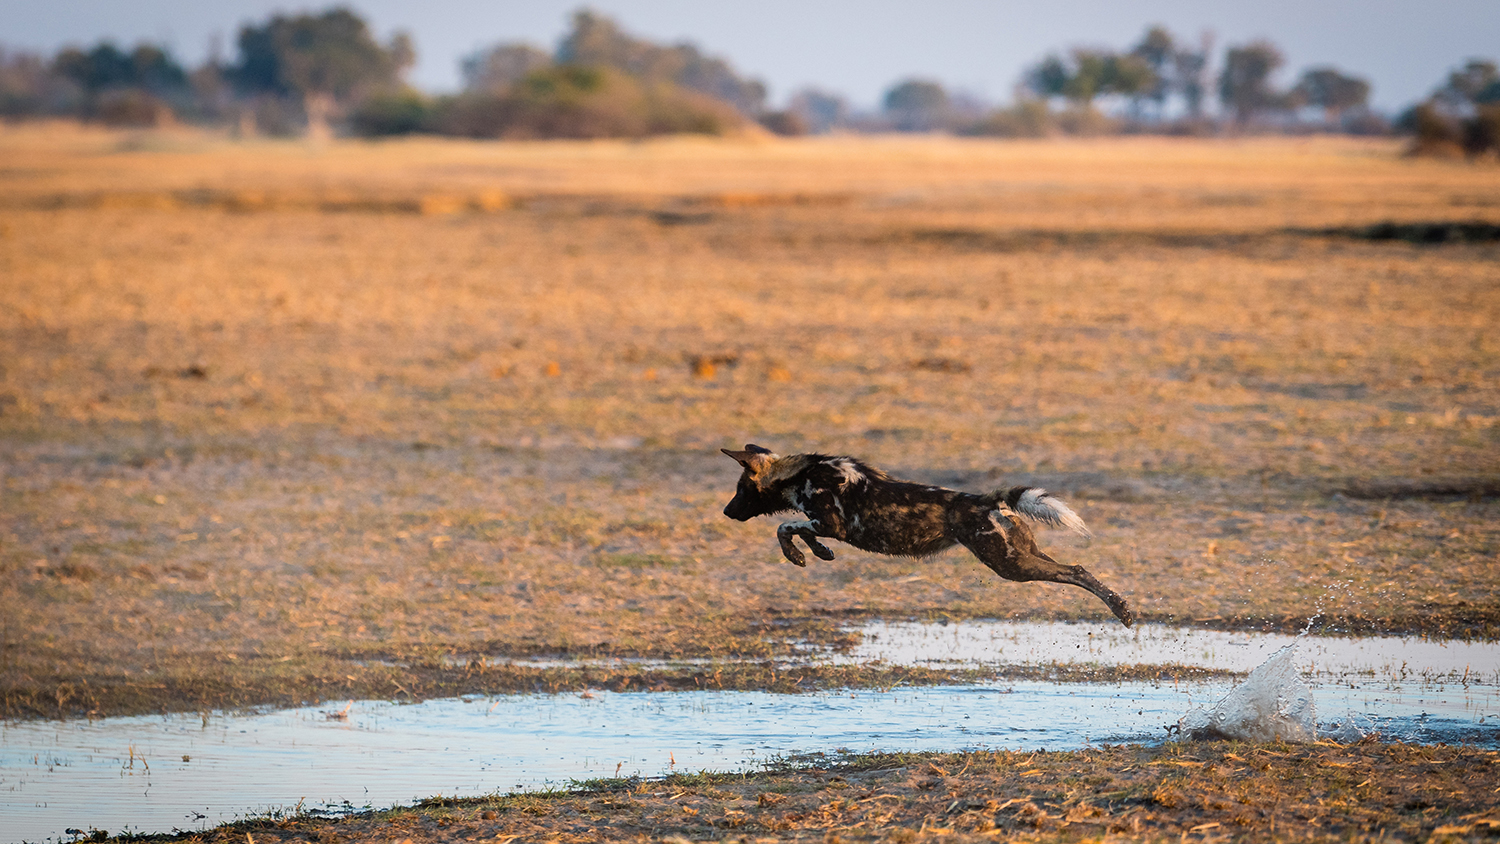 An African wild dog crosses a small canal in northern Botswana's Okavango Delta. Although the dog depicted here is able to cross the river with ease, the same does not hold true for larger swamps, rivers and lakes that prove to be nearly insurmountable obstacles for the species. (Image: Dominik Behr)